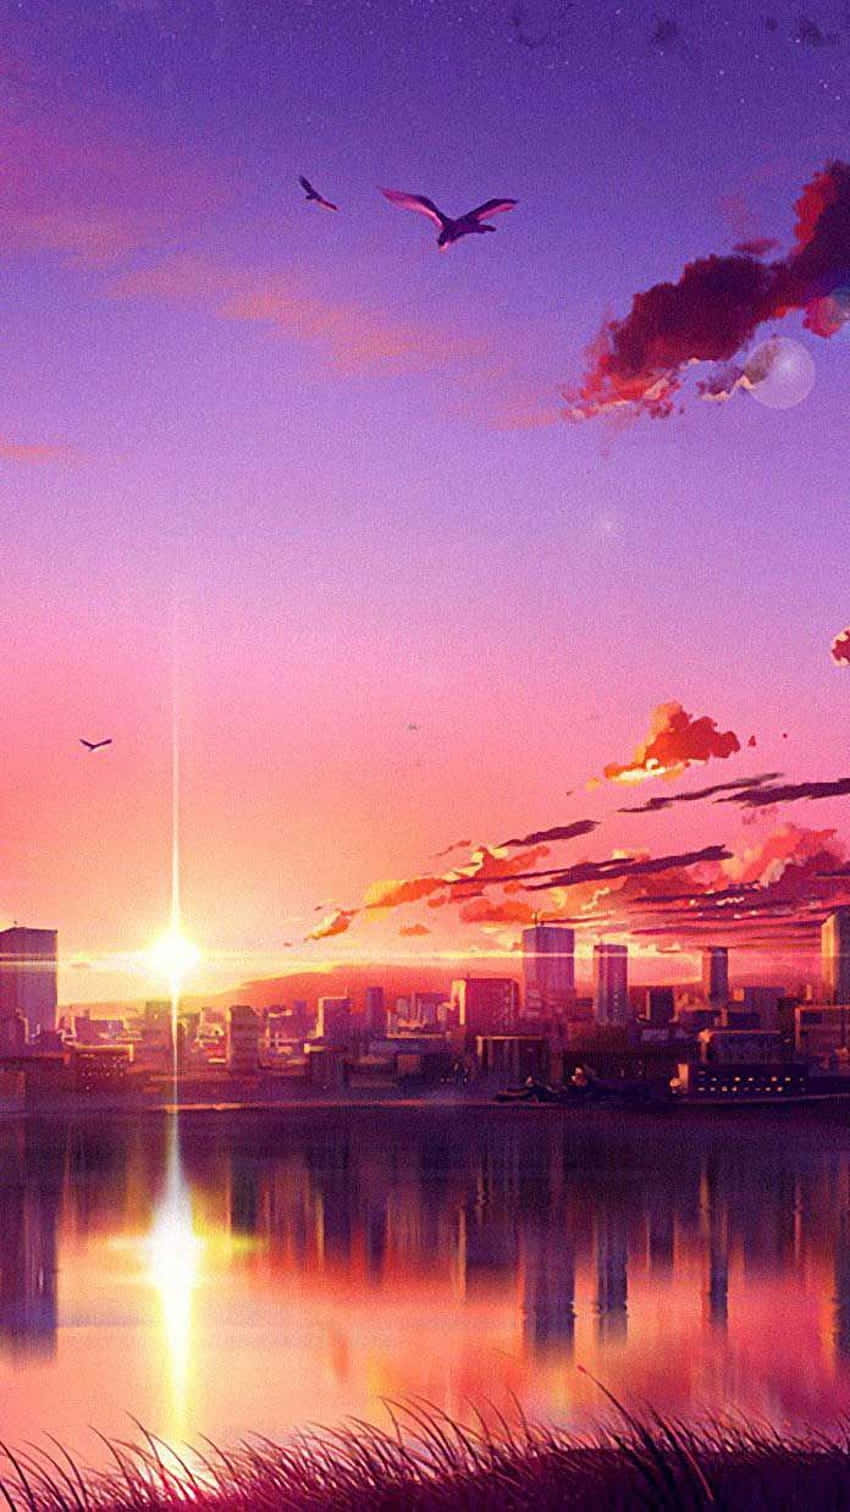 100+] Anime Sunset Iphone Wallpapers